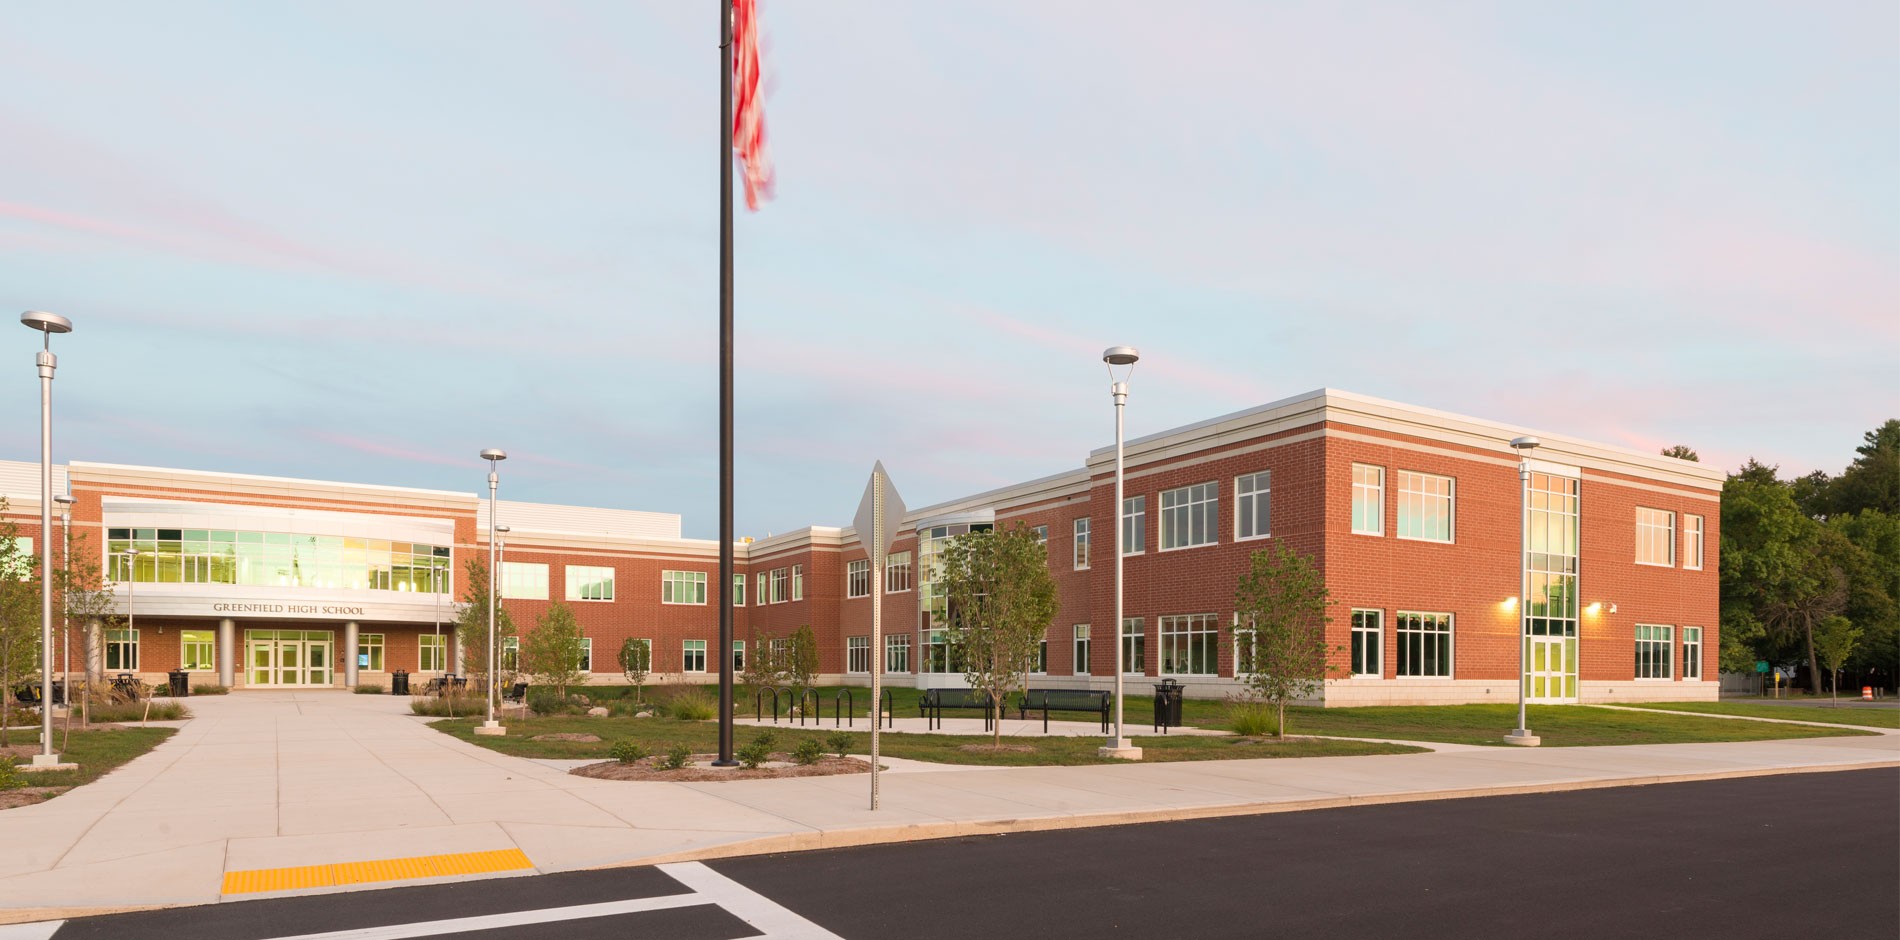 greenfield-ma-high-school-ground-up-addition-renovation-project